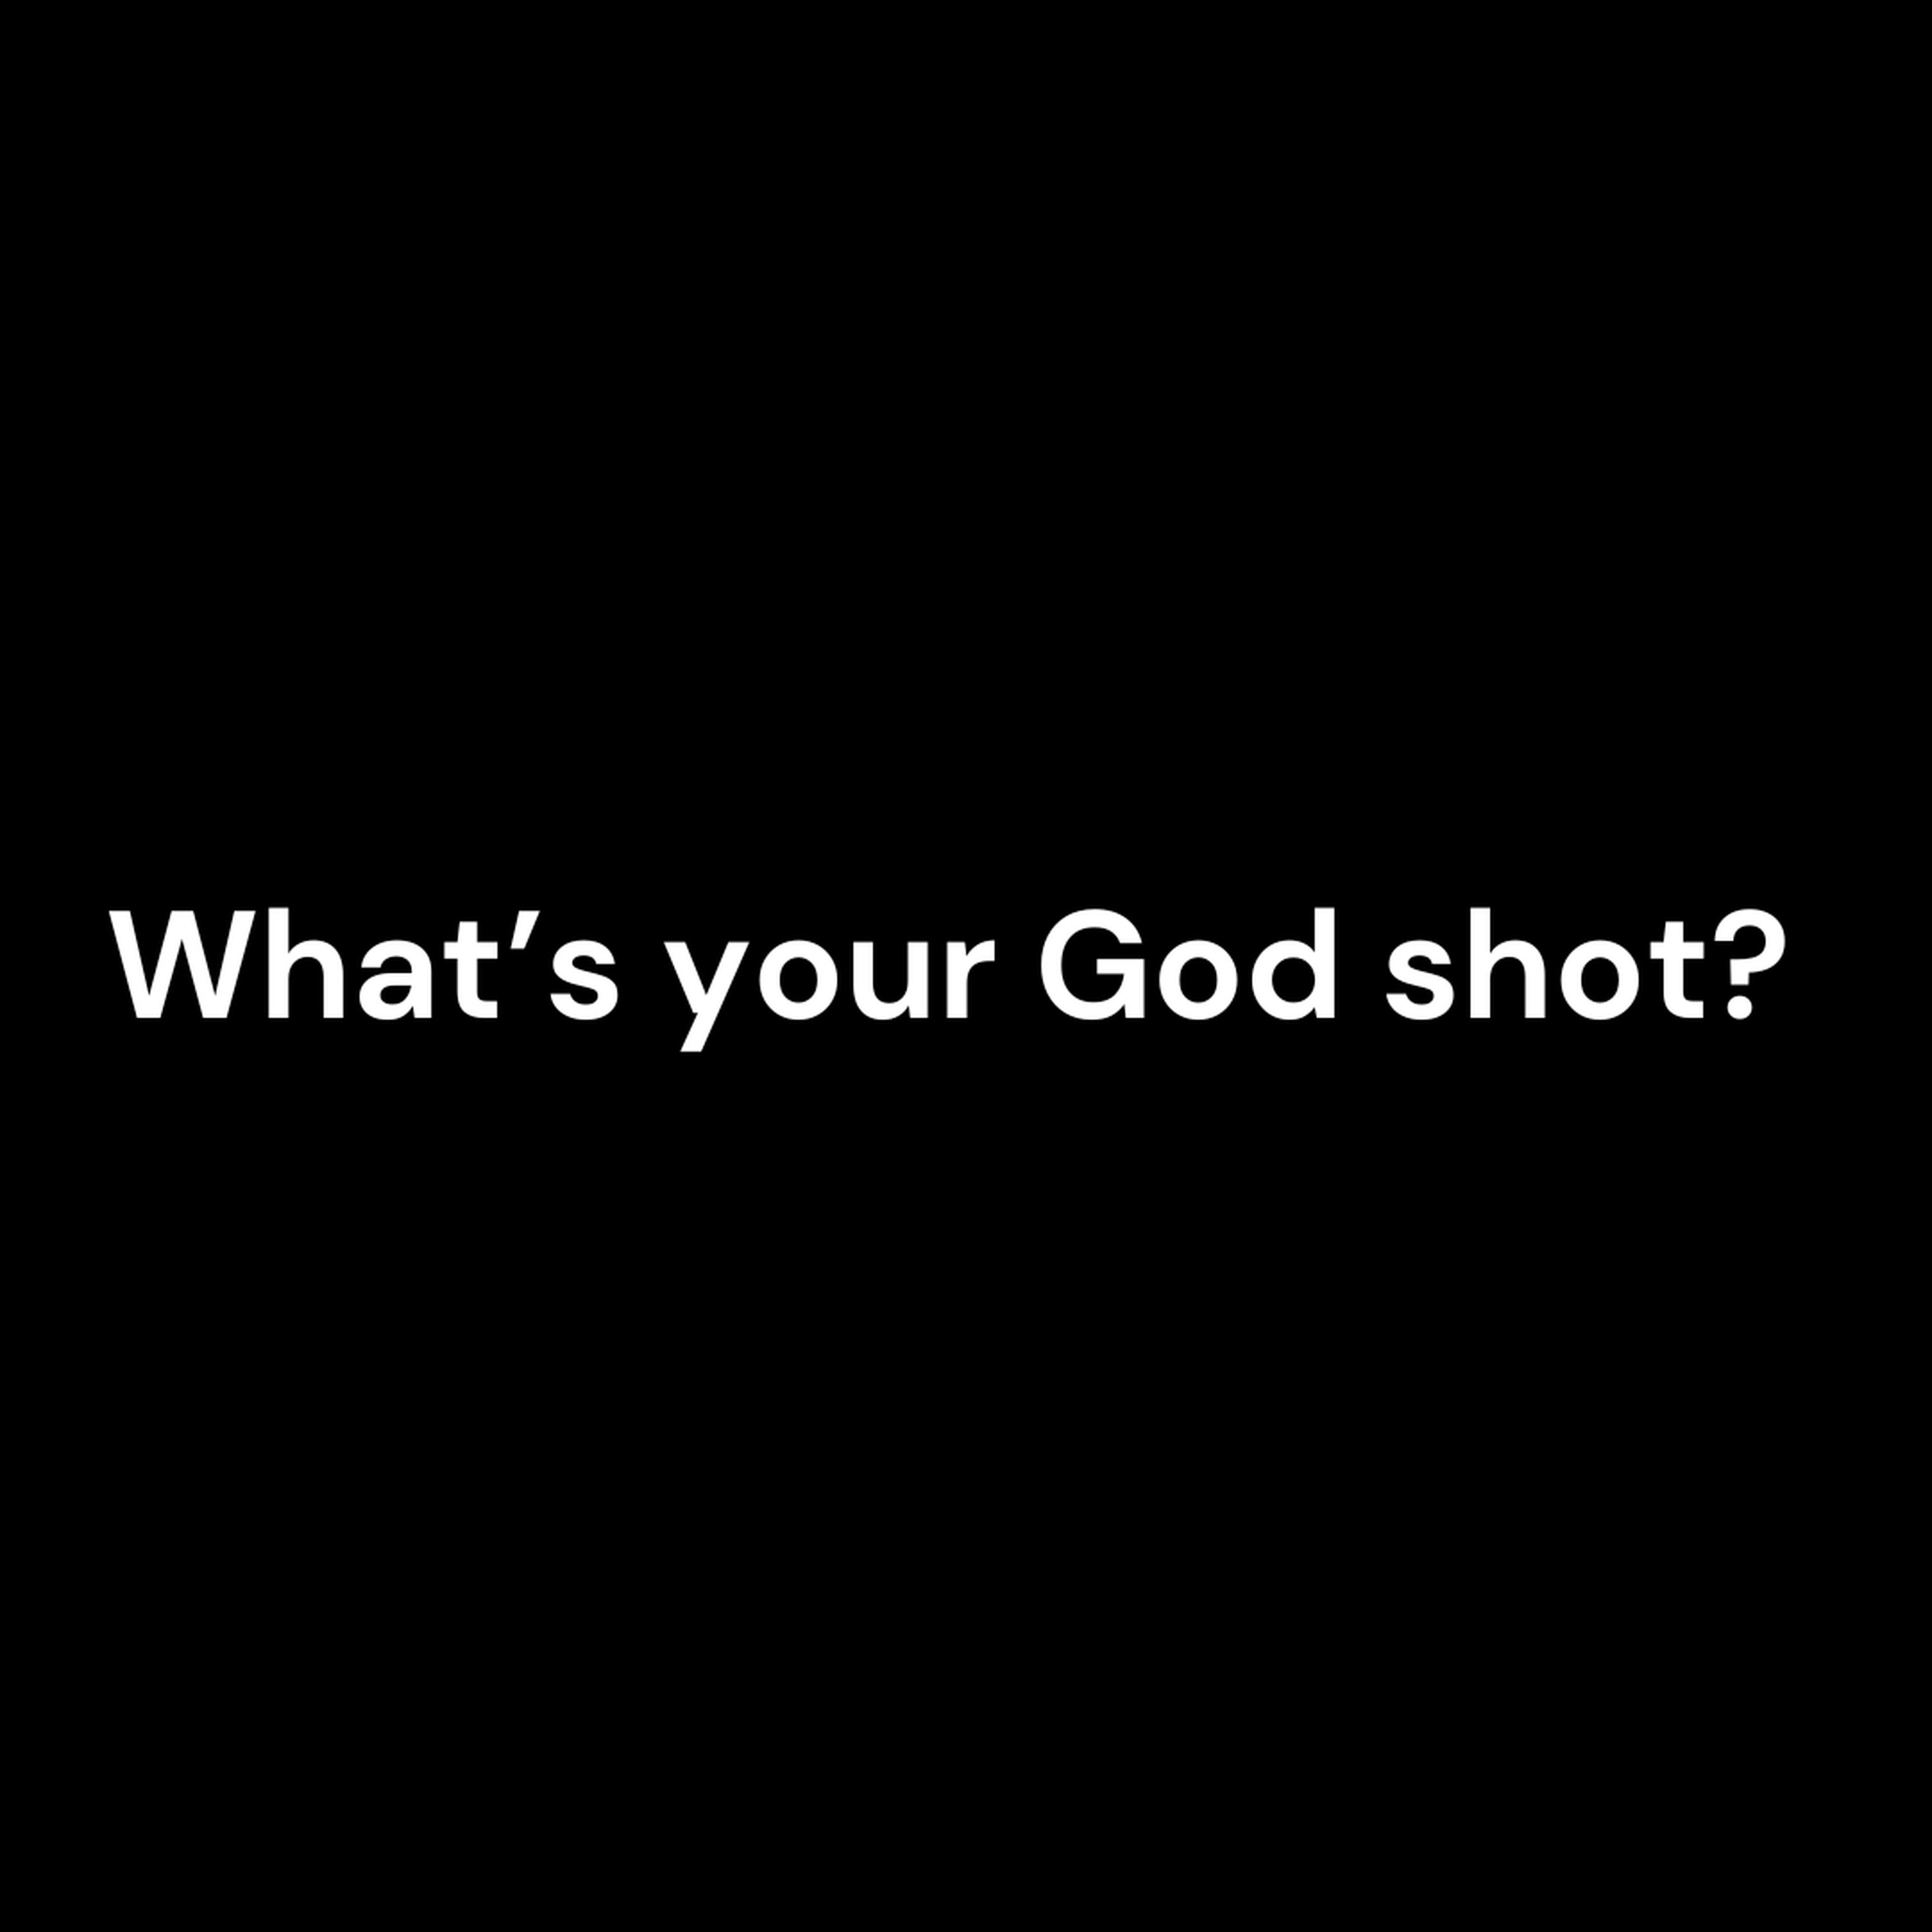 What's your God shot?